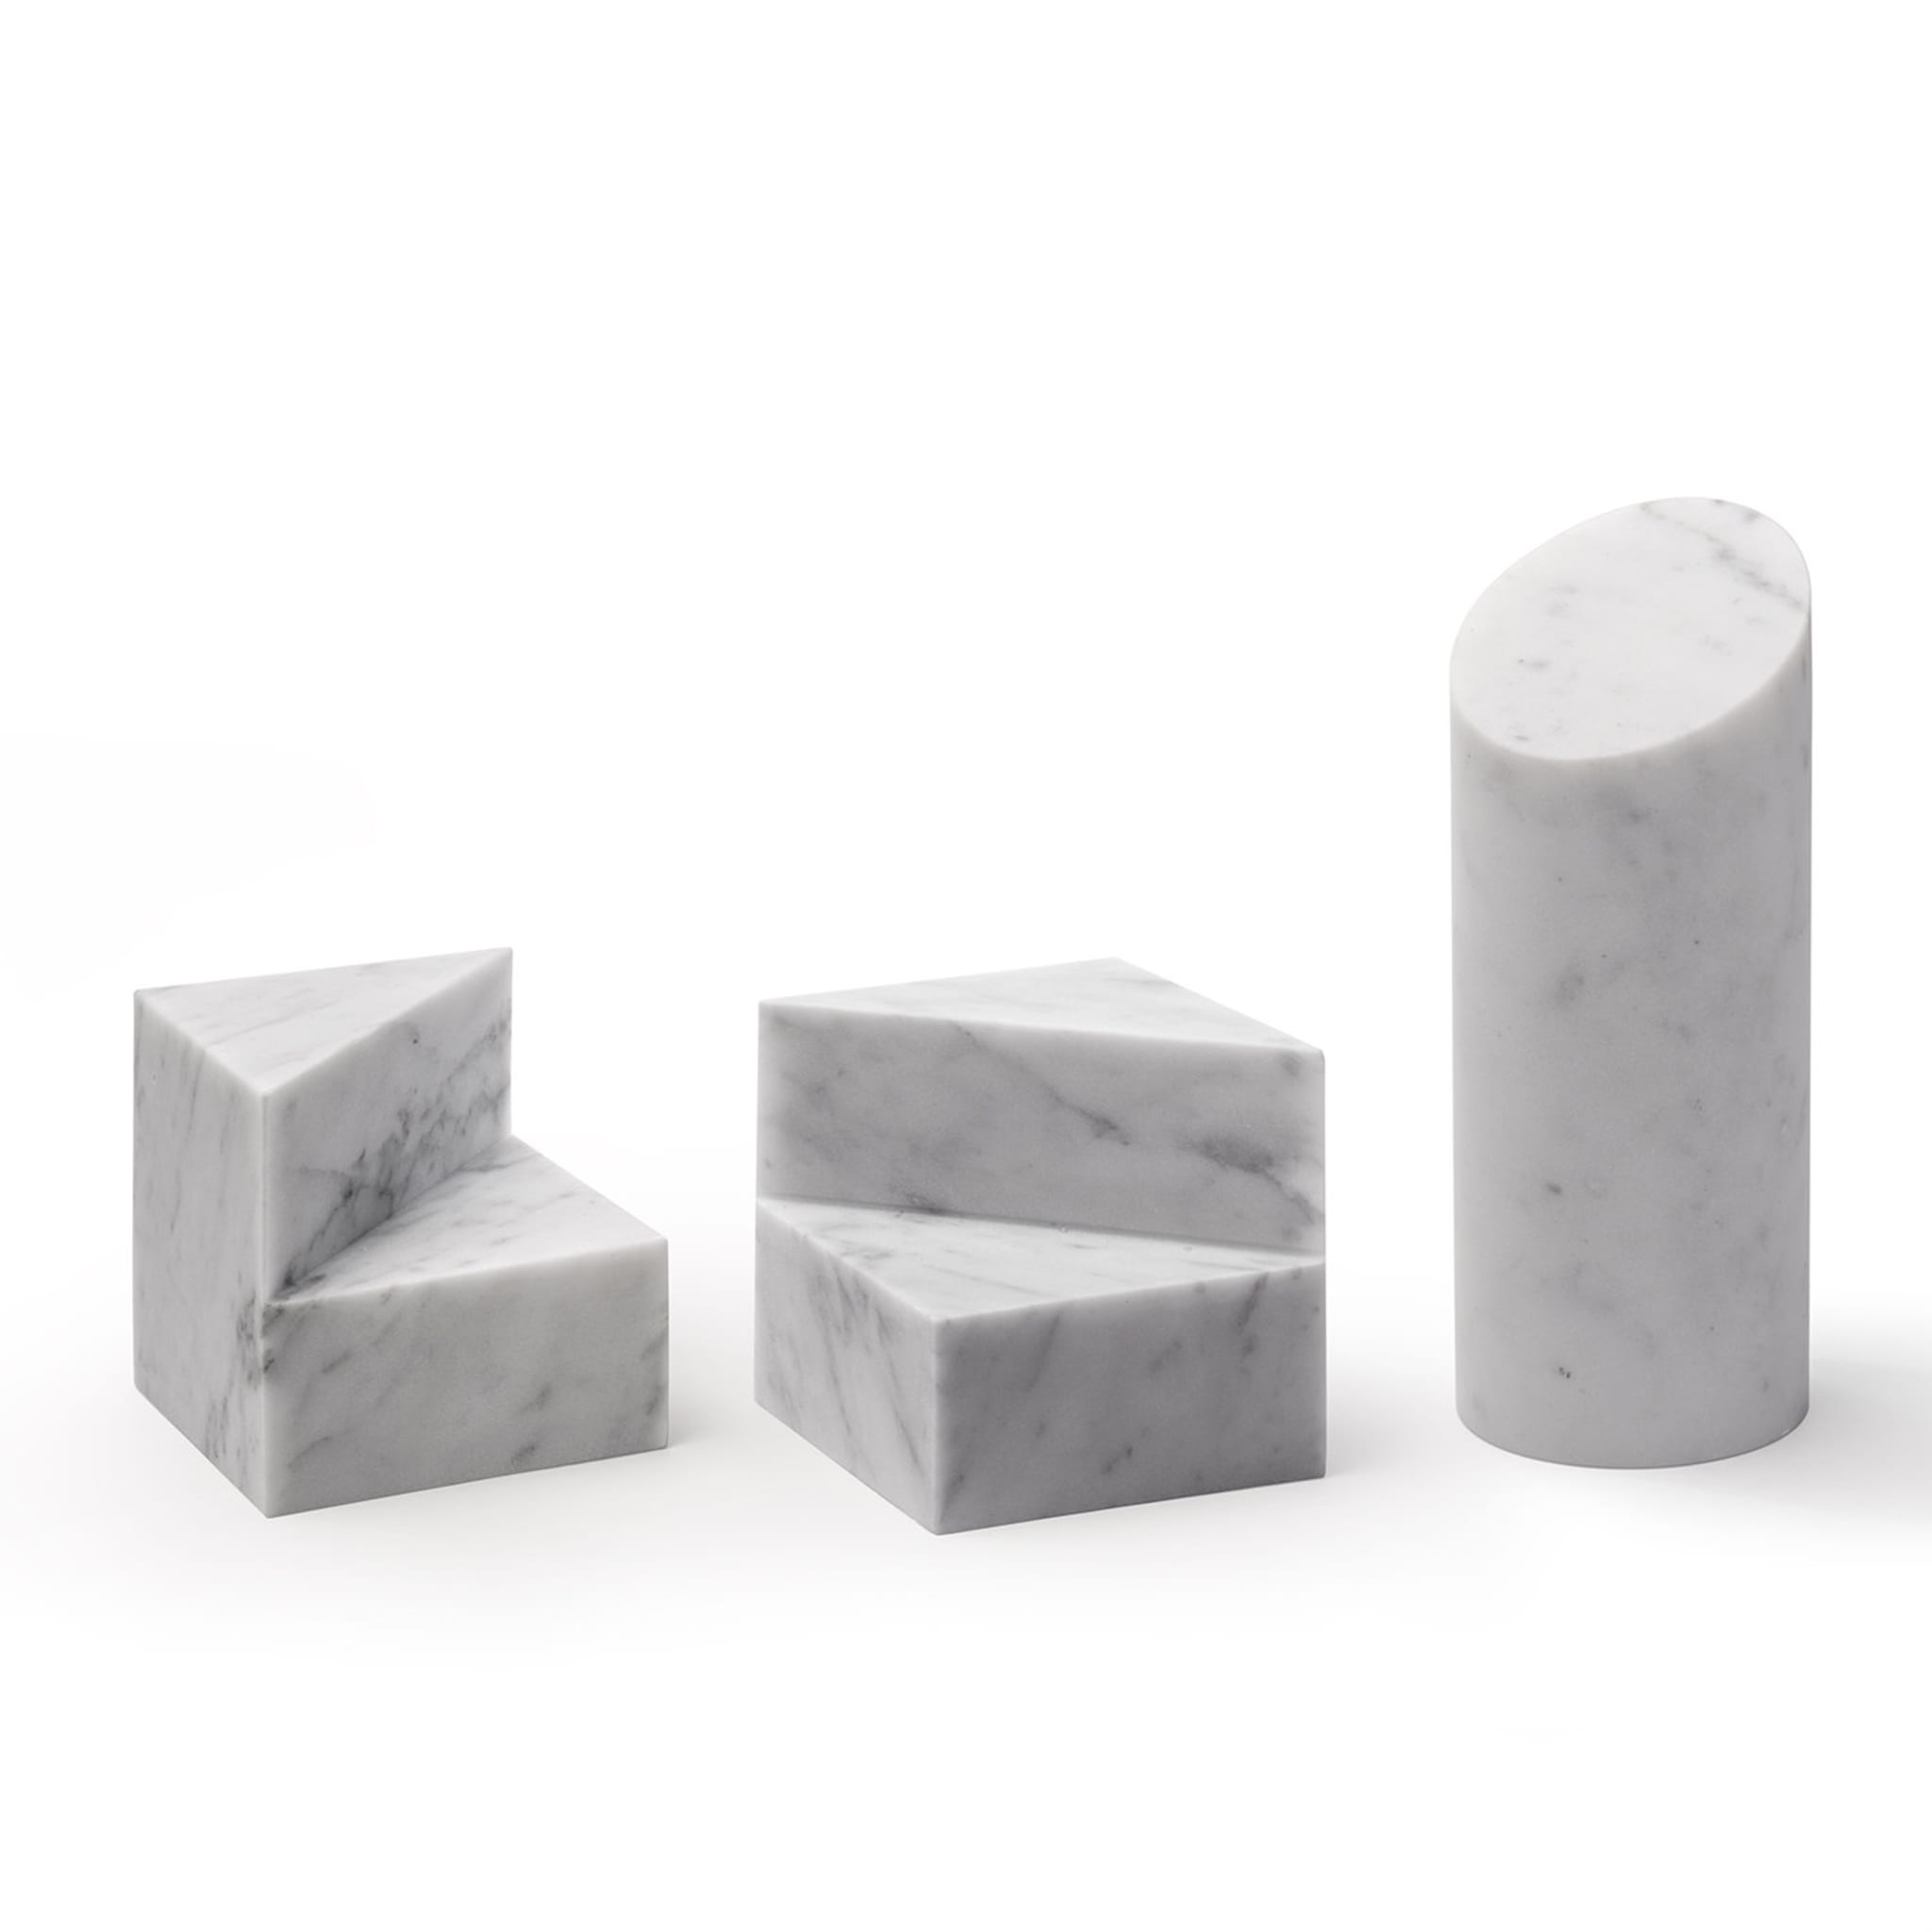 Kilos White Cylinder Bookend by Elisa Ossino - Alternative view 1